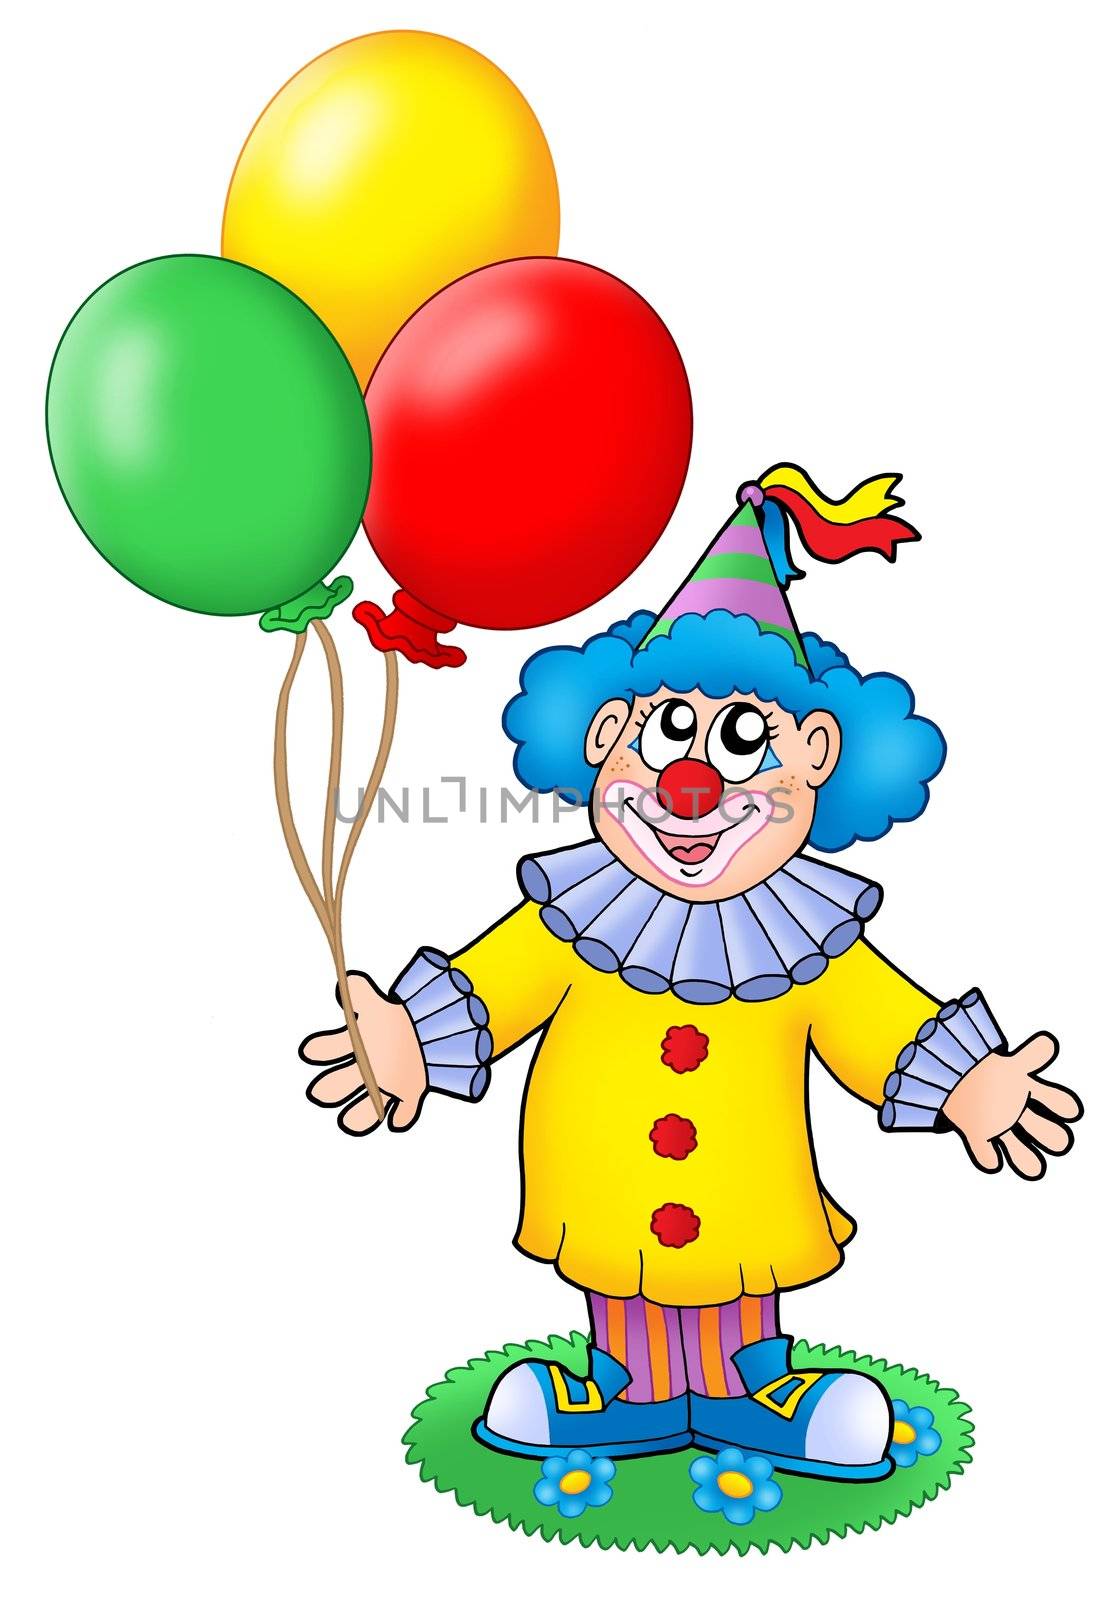 Cute clown with balloons - color illustration.